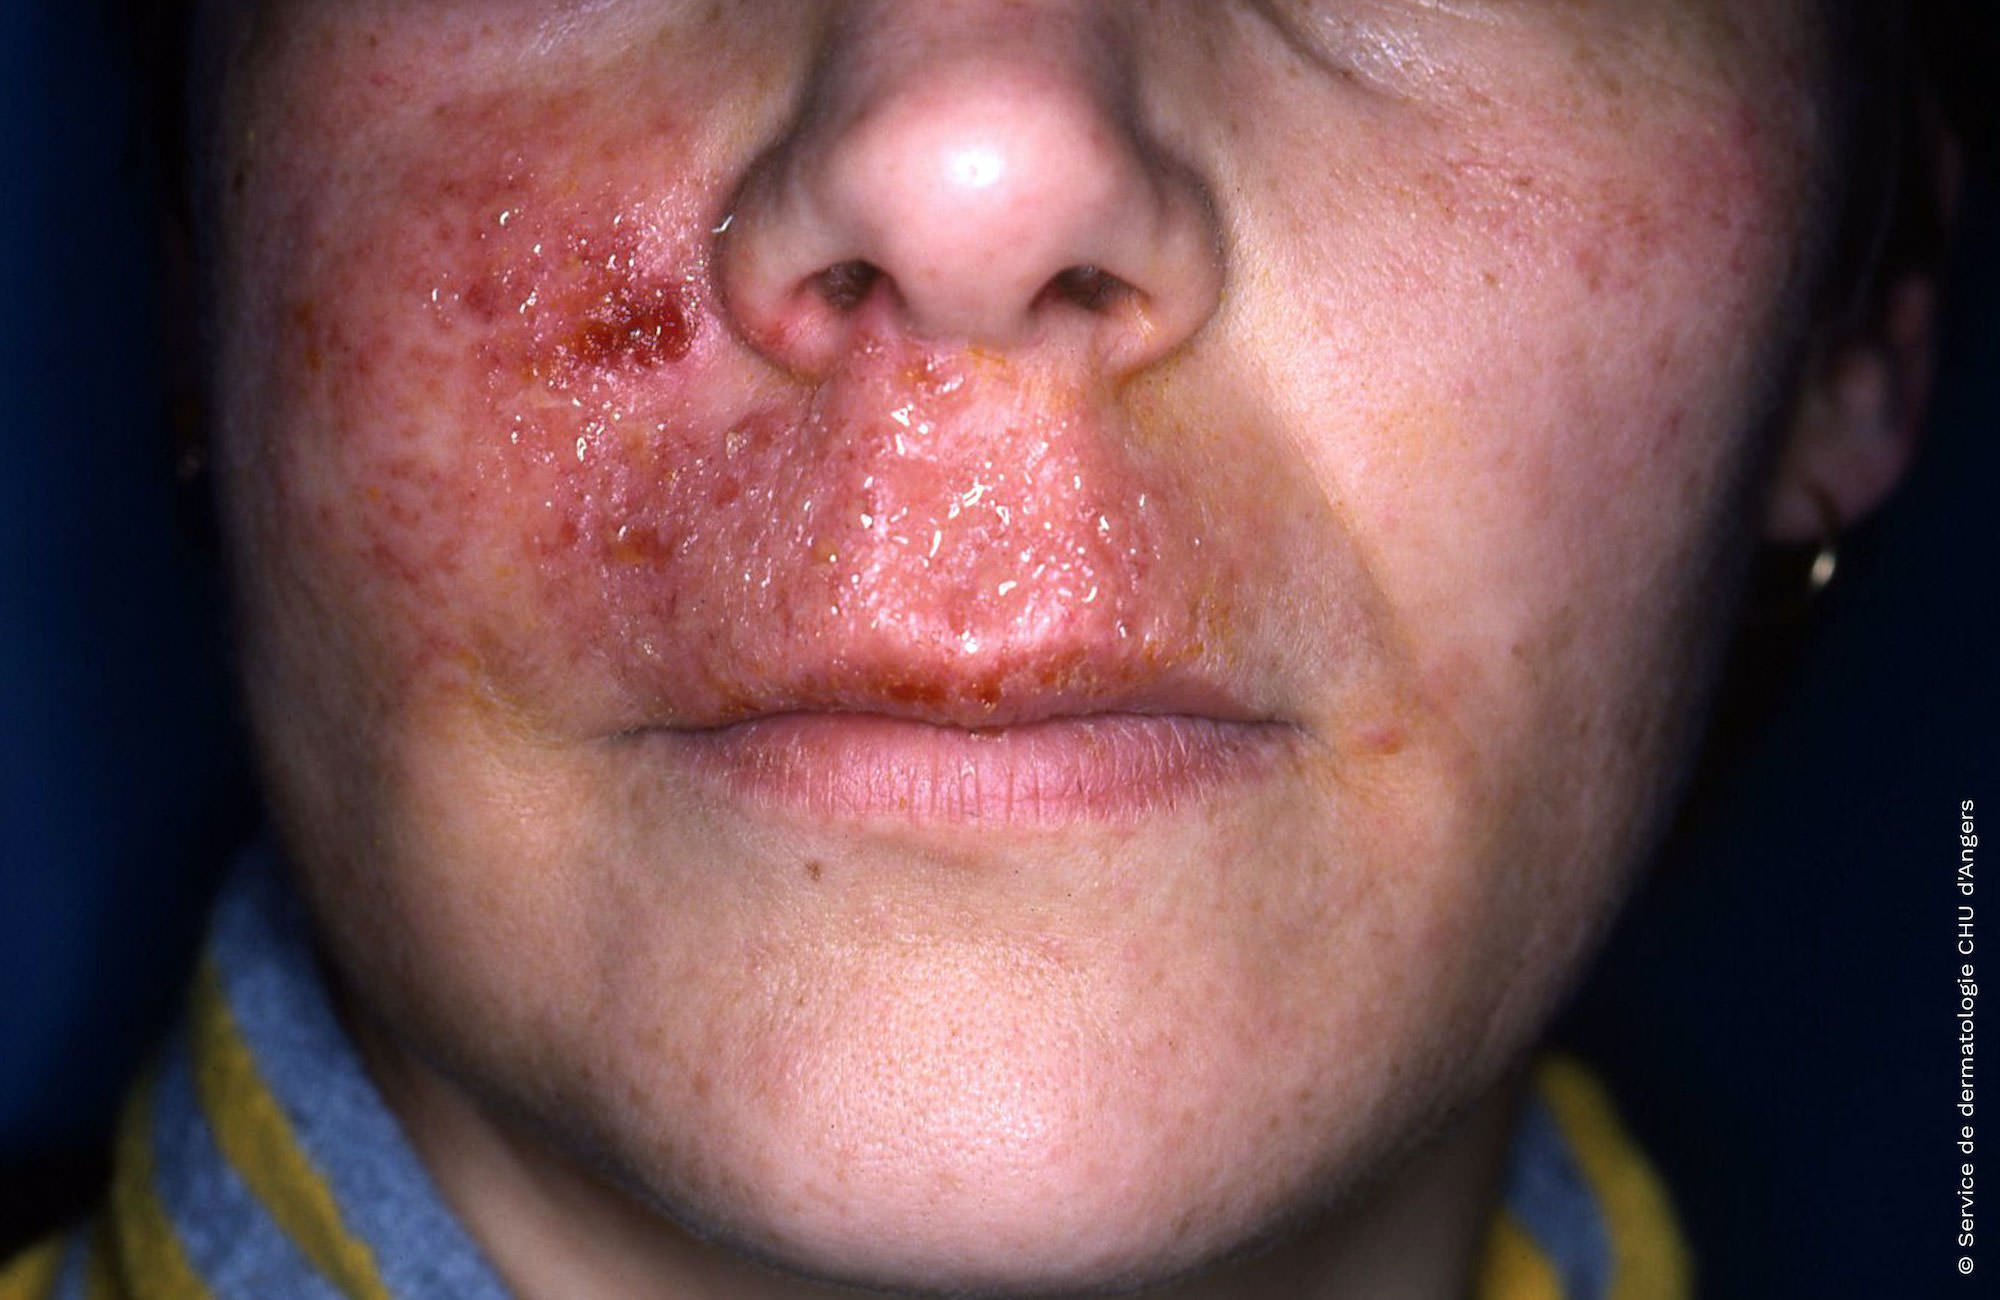 Eczema on the face and neck